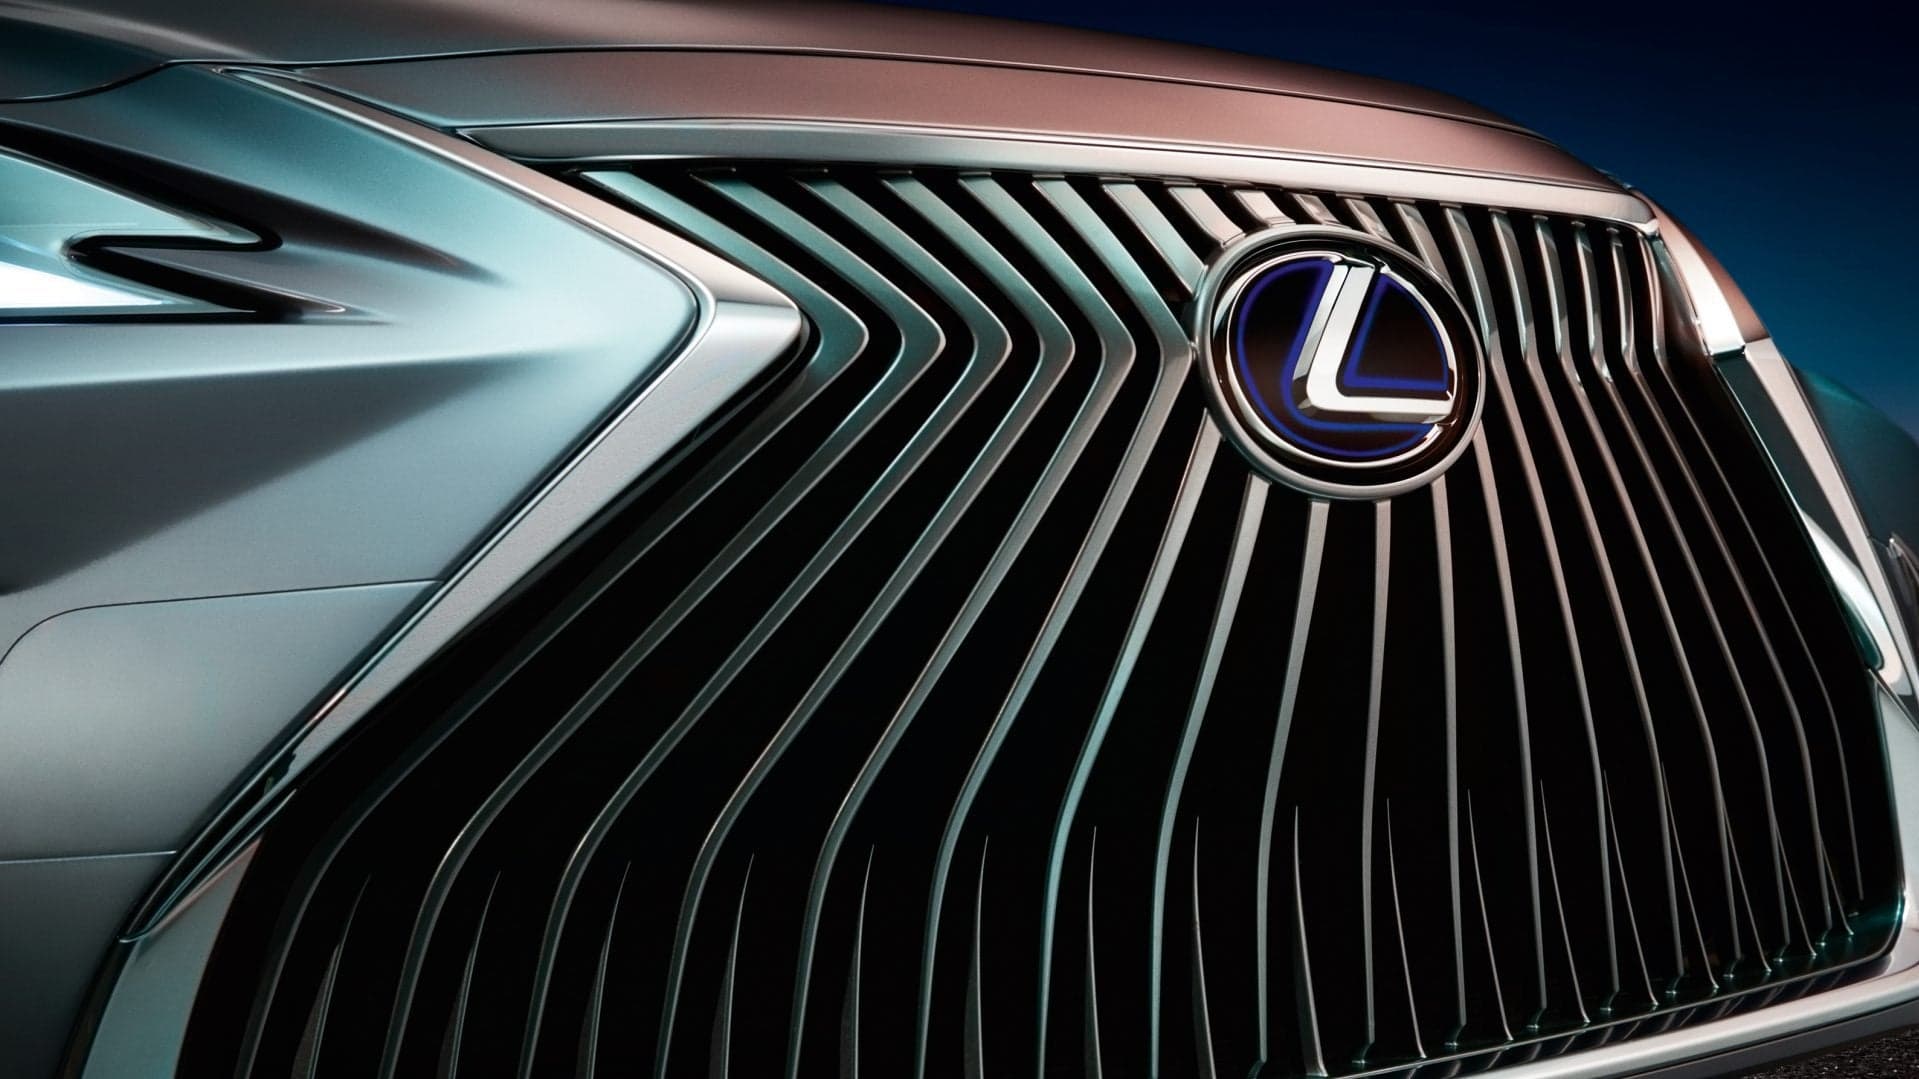 Lexus Teases the New ES With a Shot of Its Spindle Grille